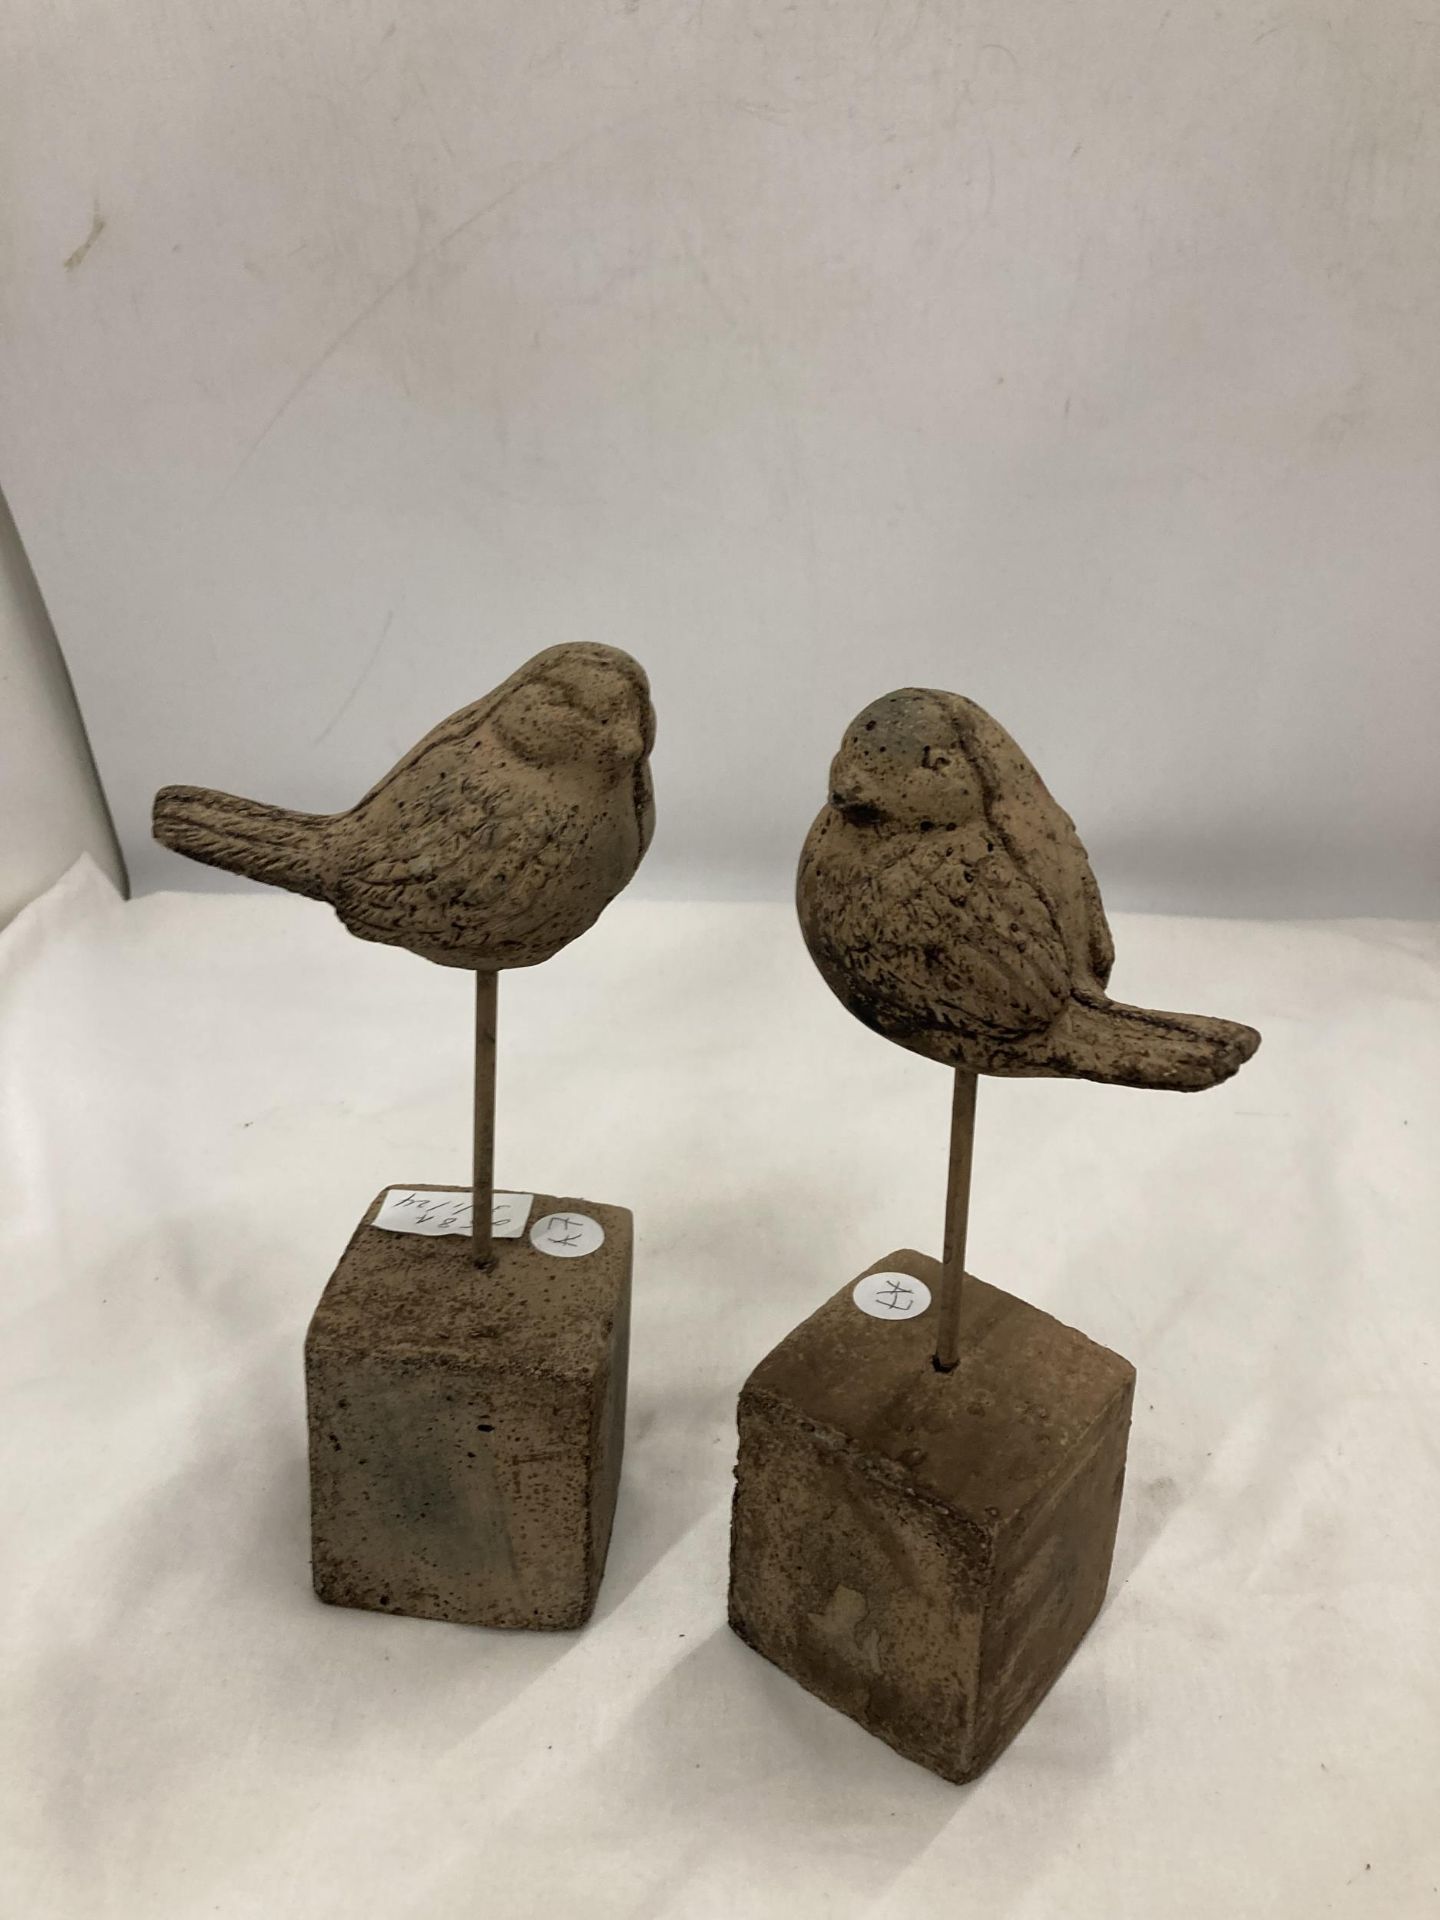 A PAIR OF STONE BIRDS ON A PLINTH - Image 2 of 2